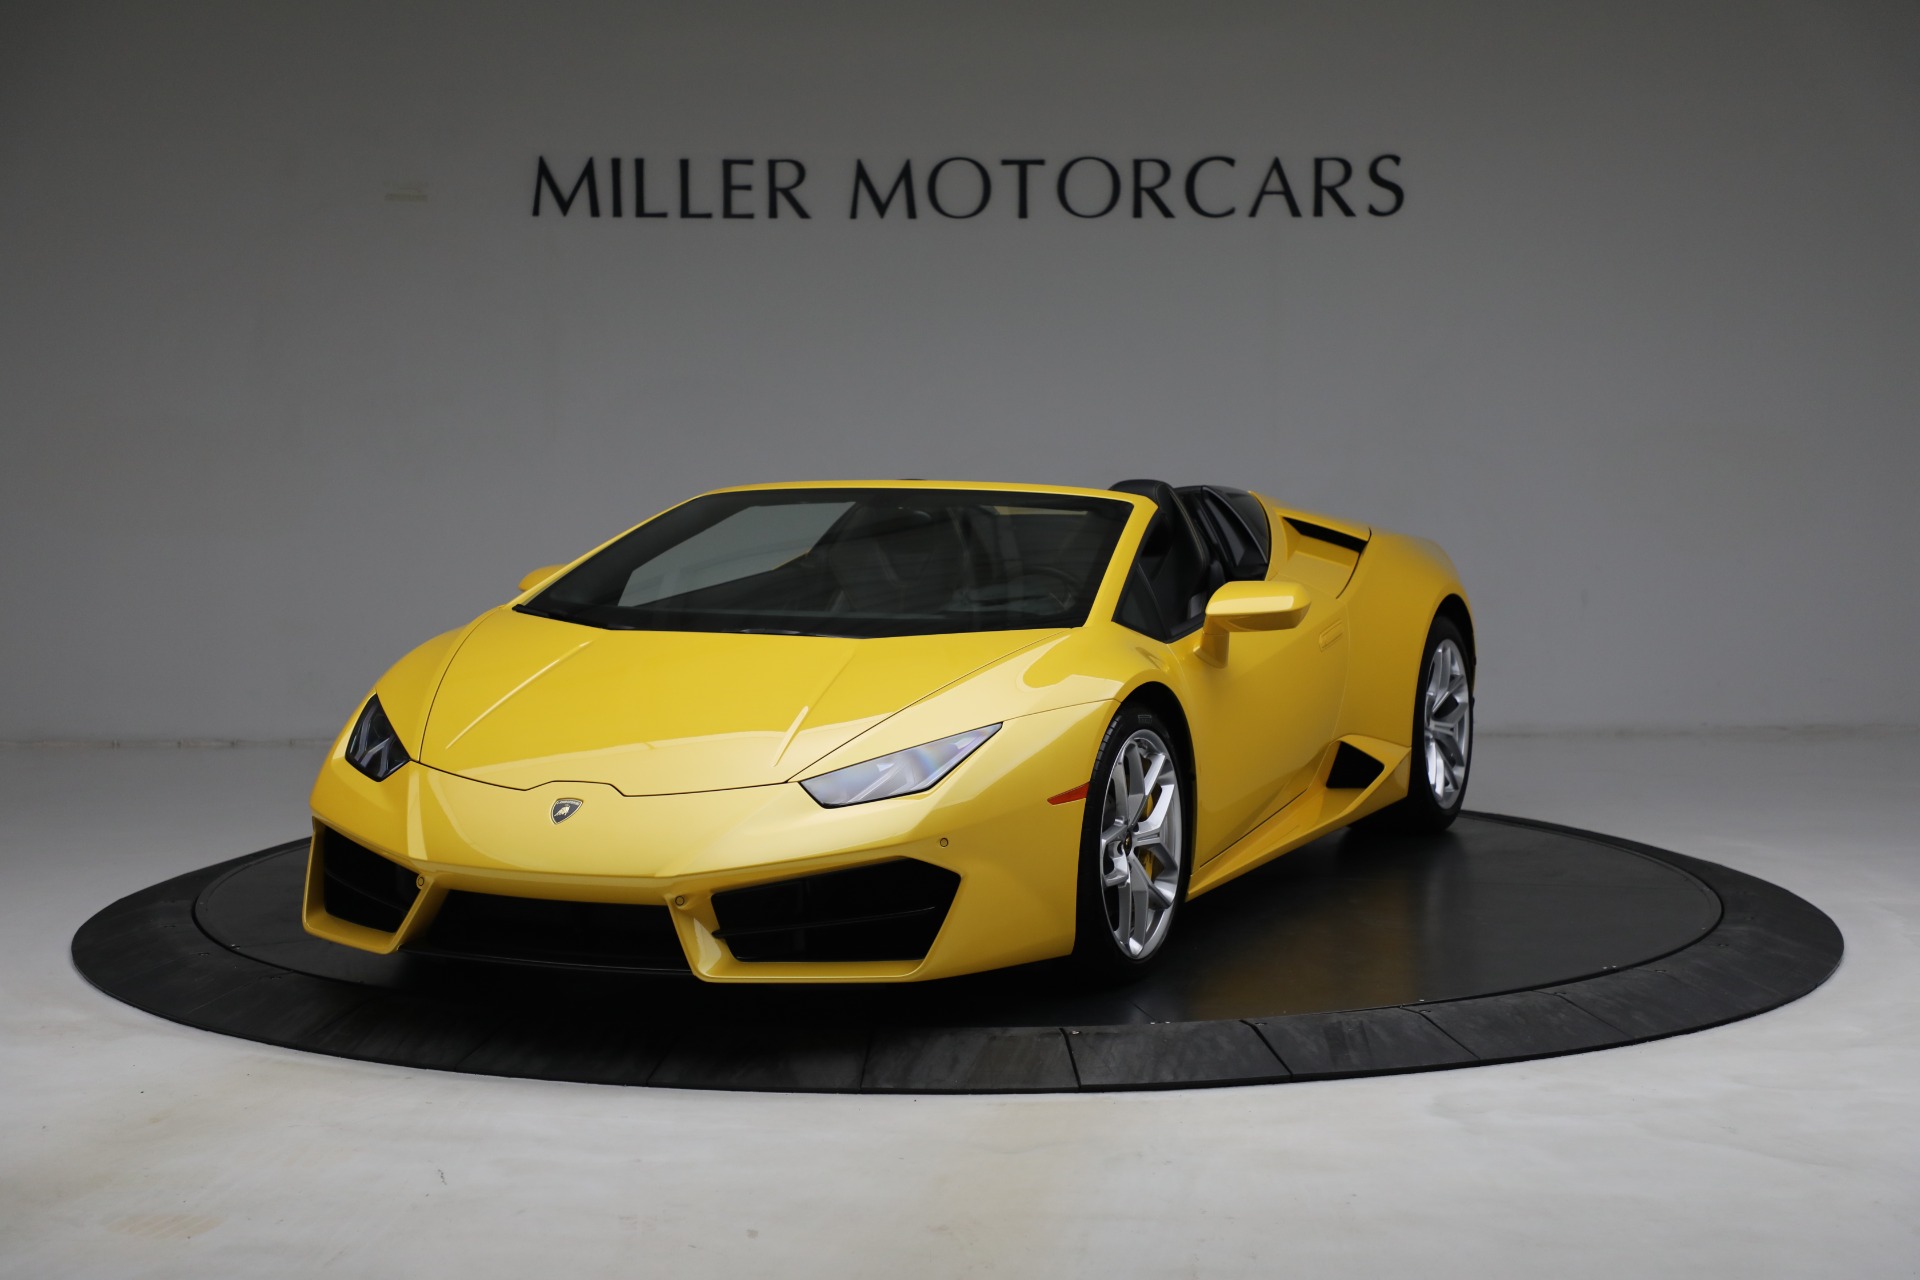 Used 2017 Lamborghini Huracan LP 580-2 Spyder for sale Sold at Aston Martin of Greenwich in Greenwich CT 06830 1